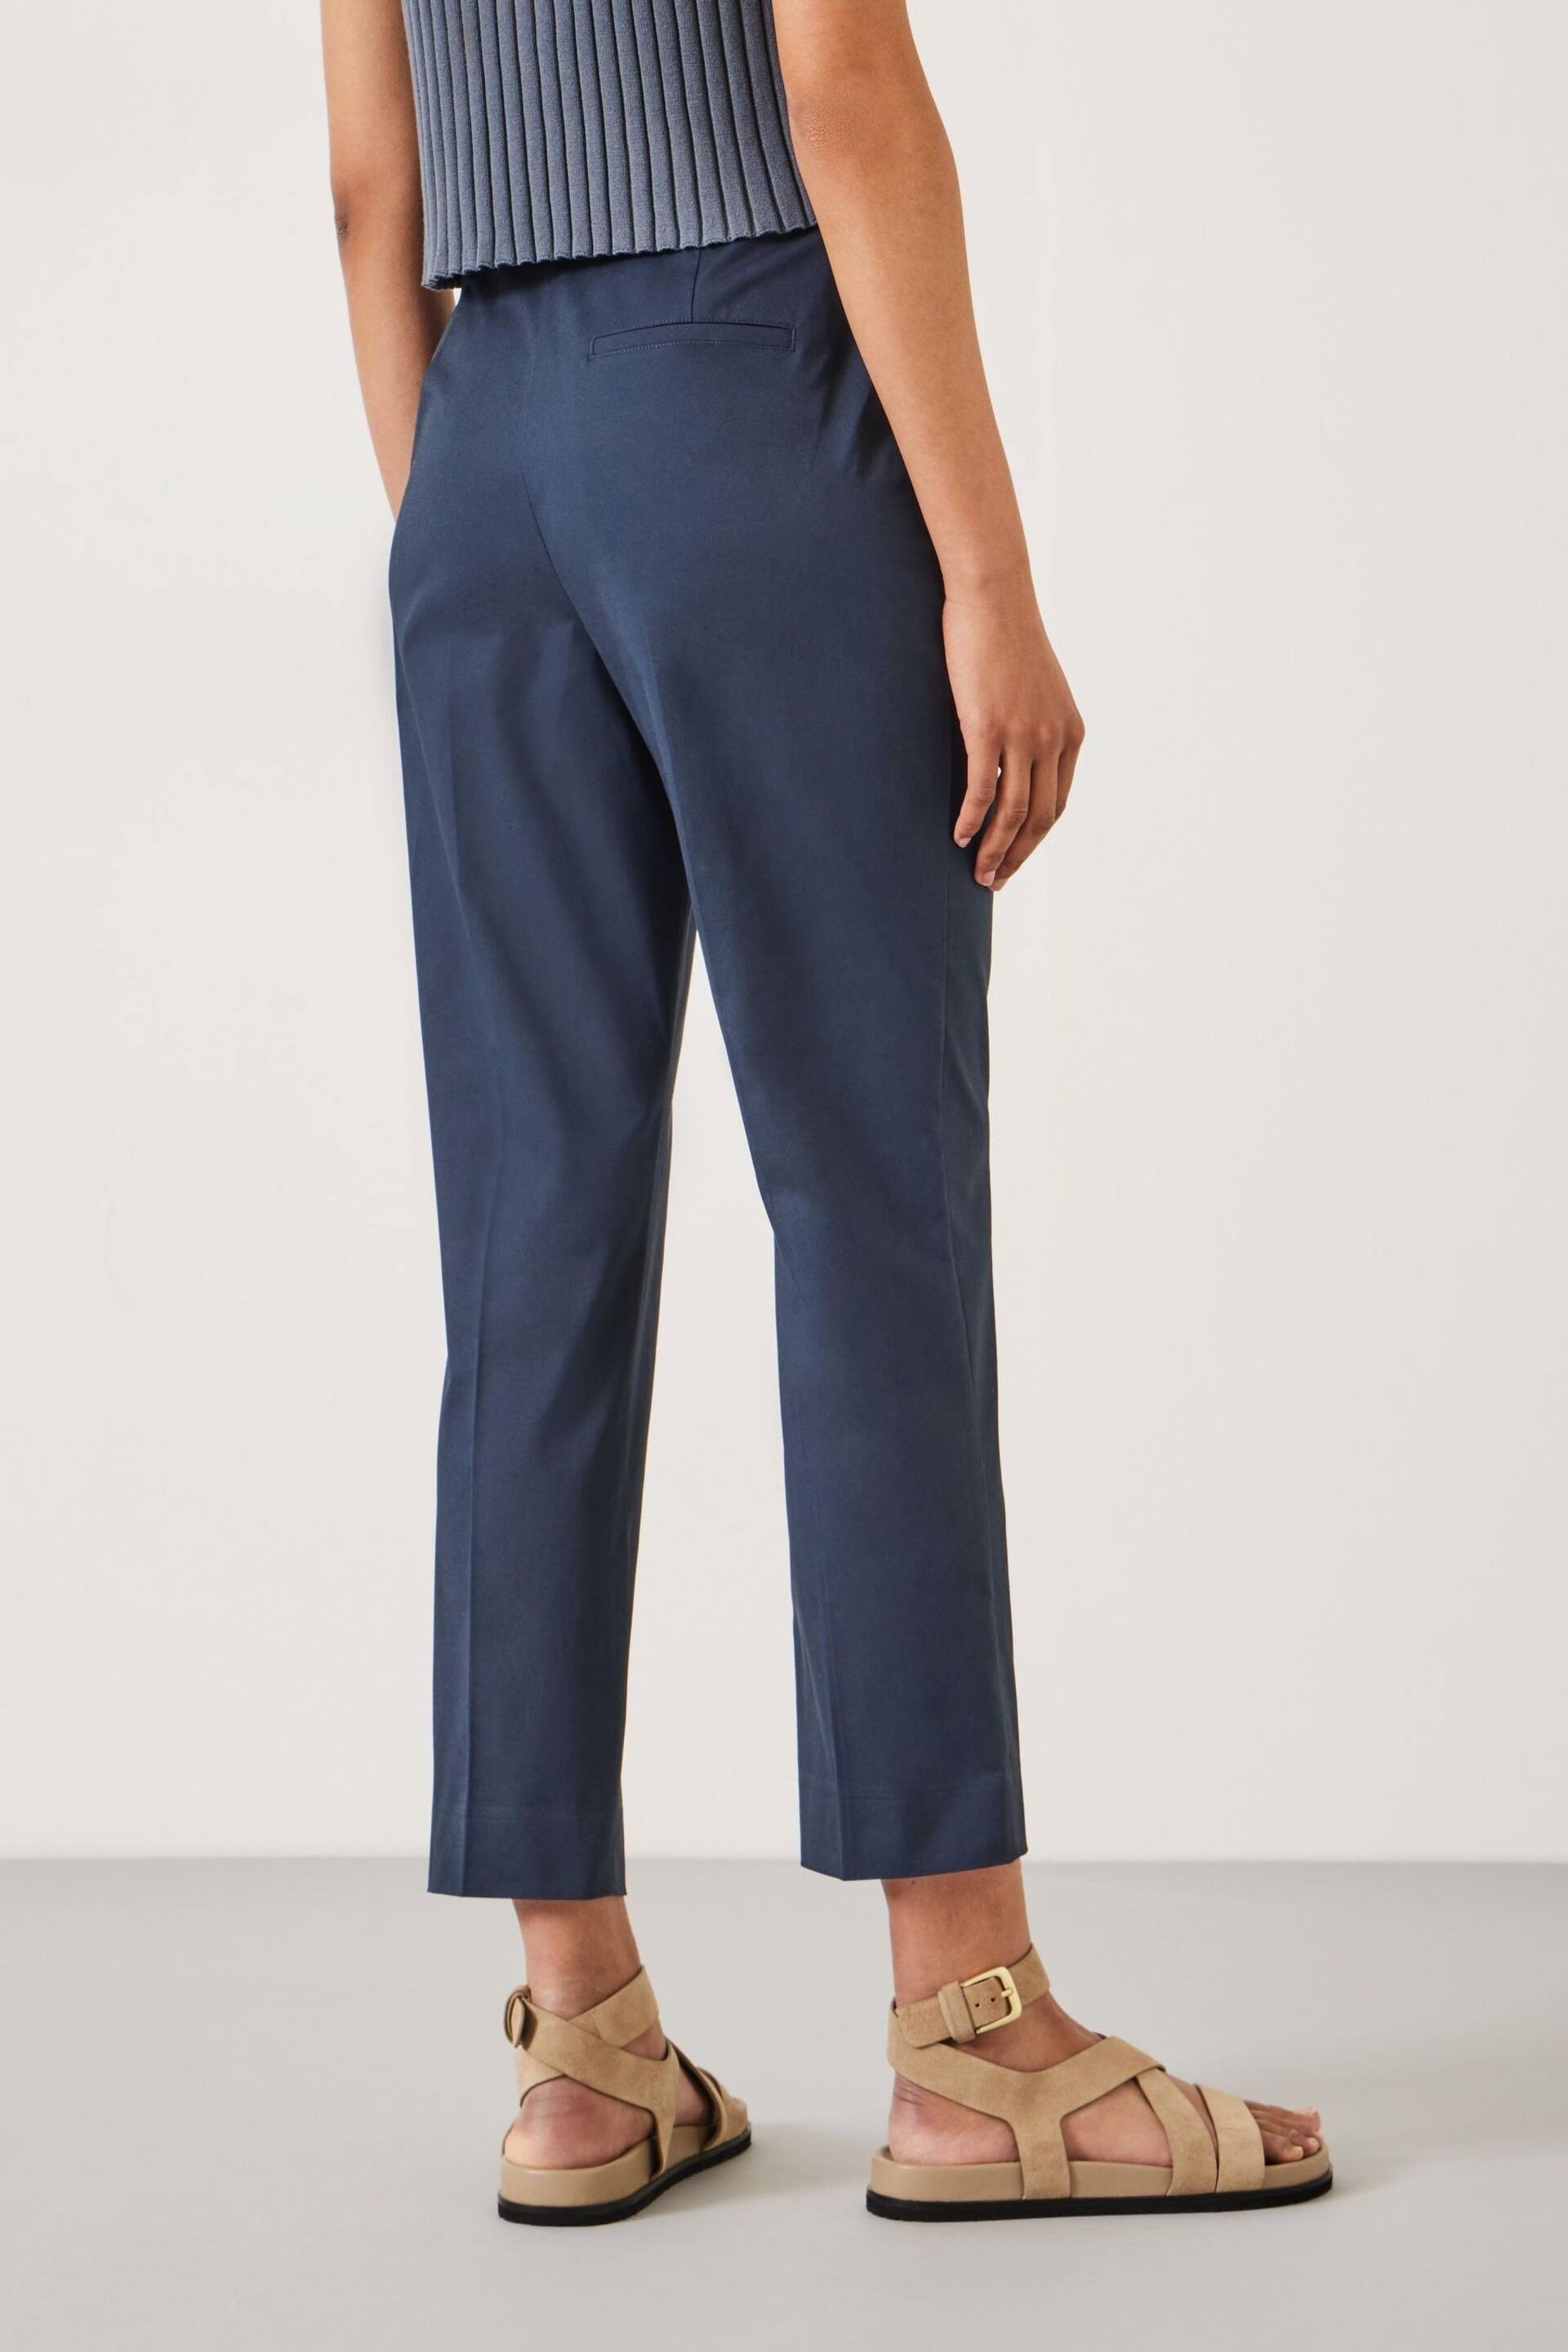 Hush Blue Hayes Cigarette Trousers - Image 2 of 5